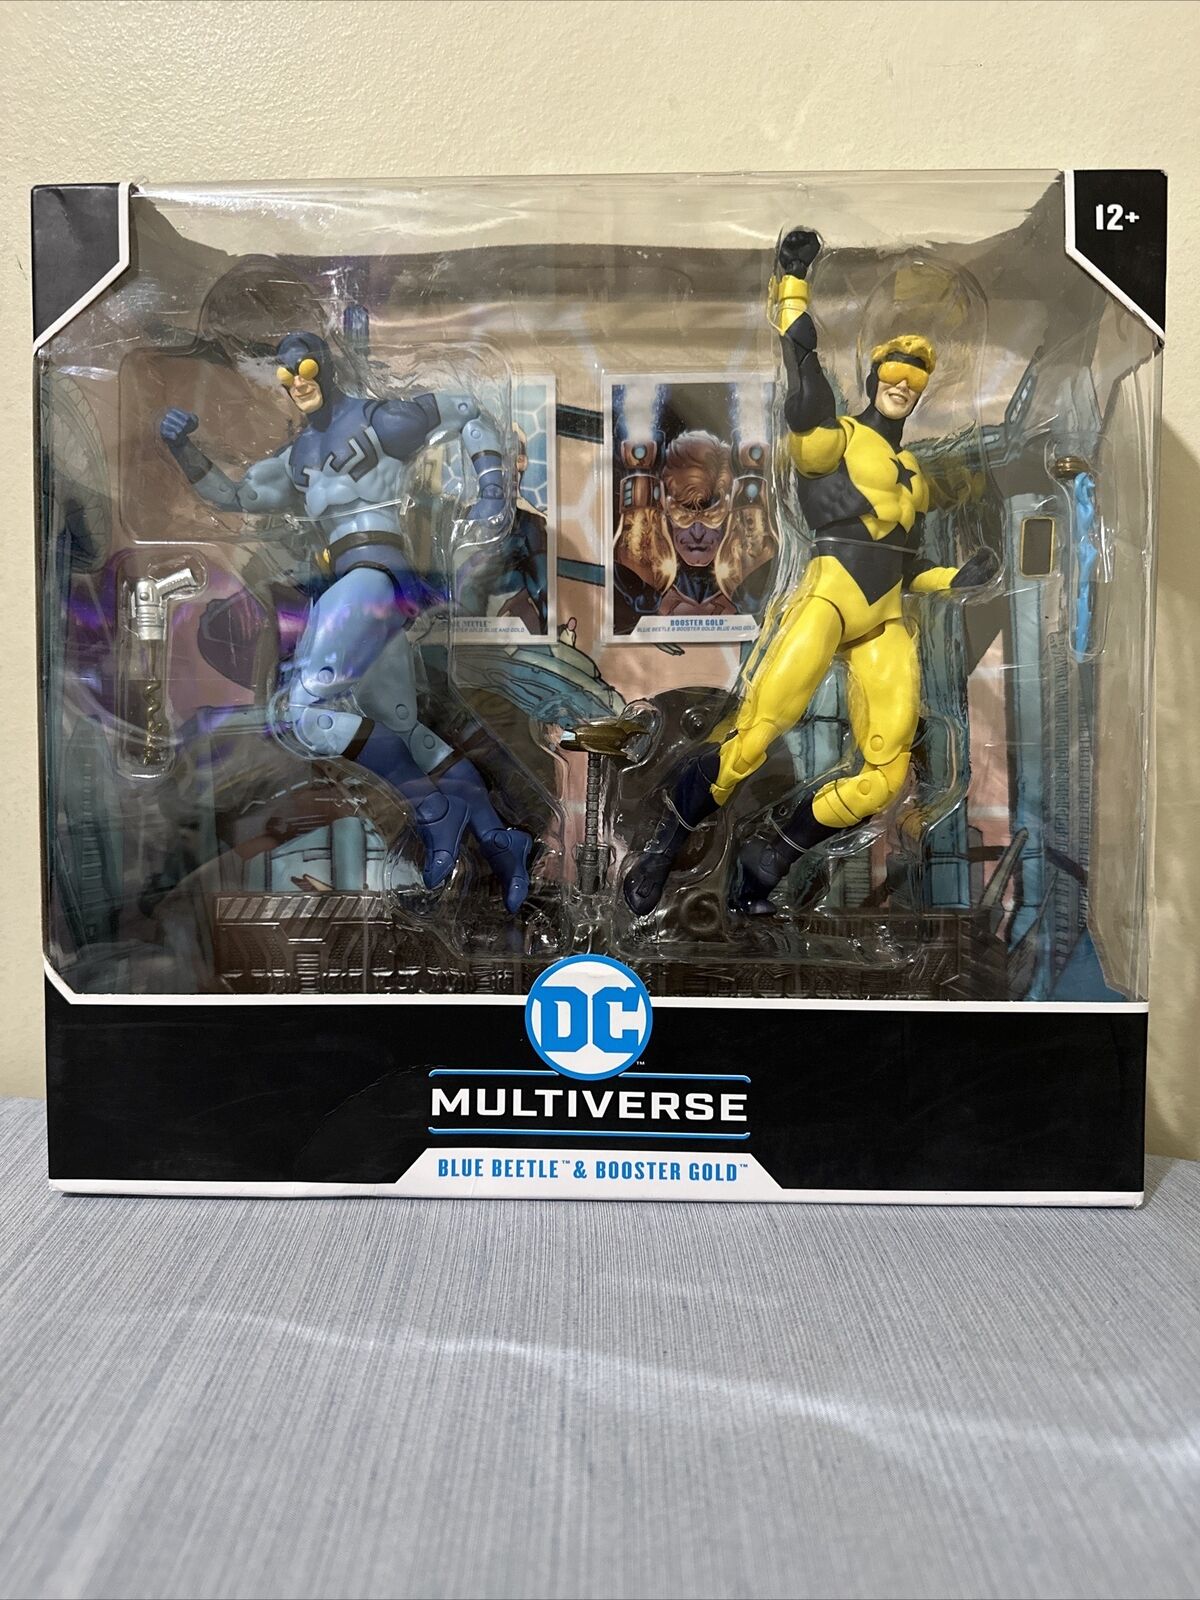 NEW McFarlane DC Collector Booster Gold & Blue Beetle 2020 Action Figure